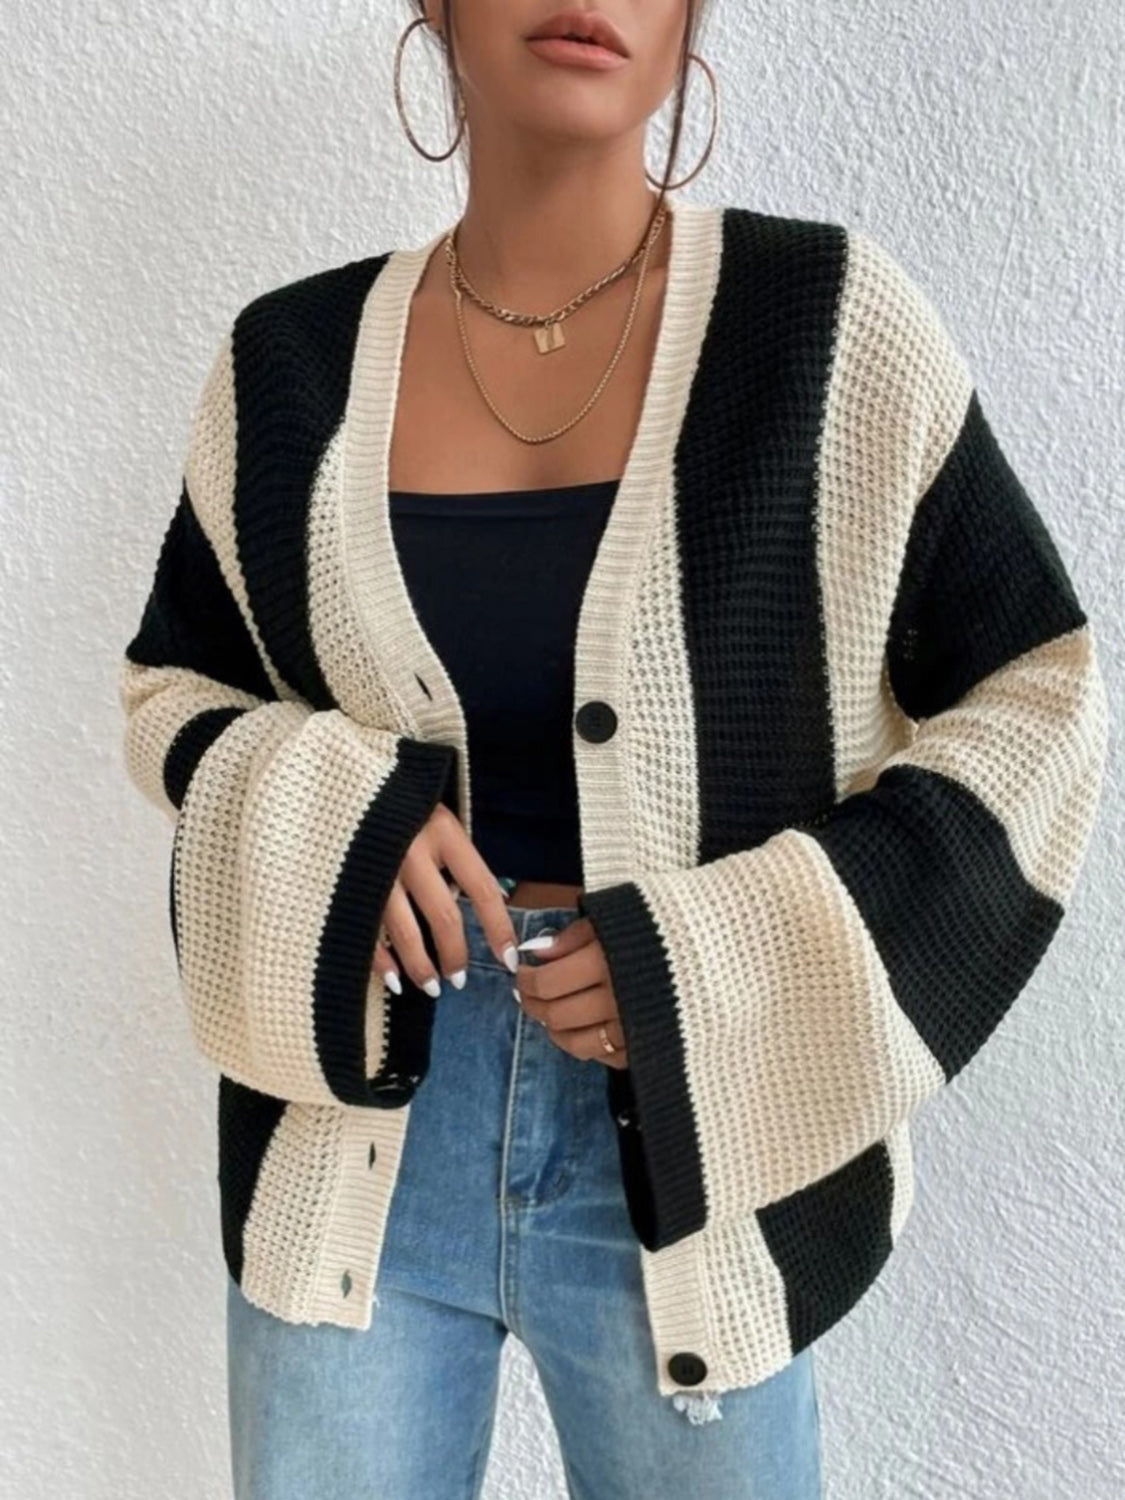 Black and White Striped Button Up Cardigan Sweater with buttons